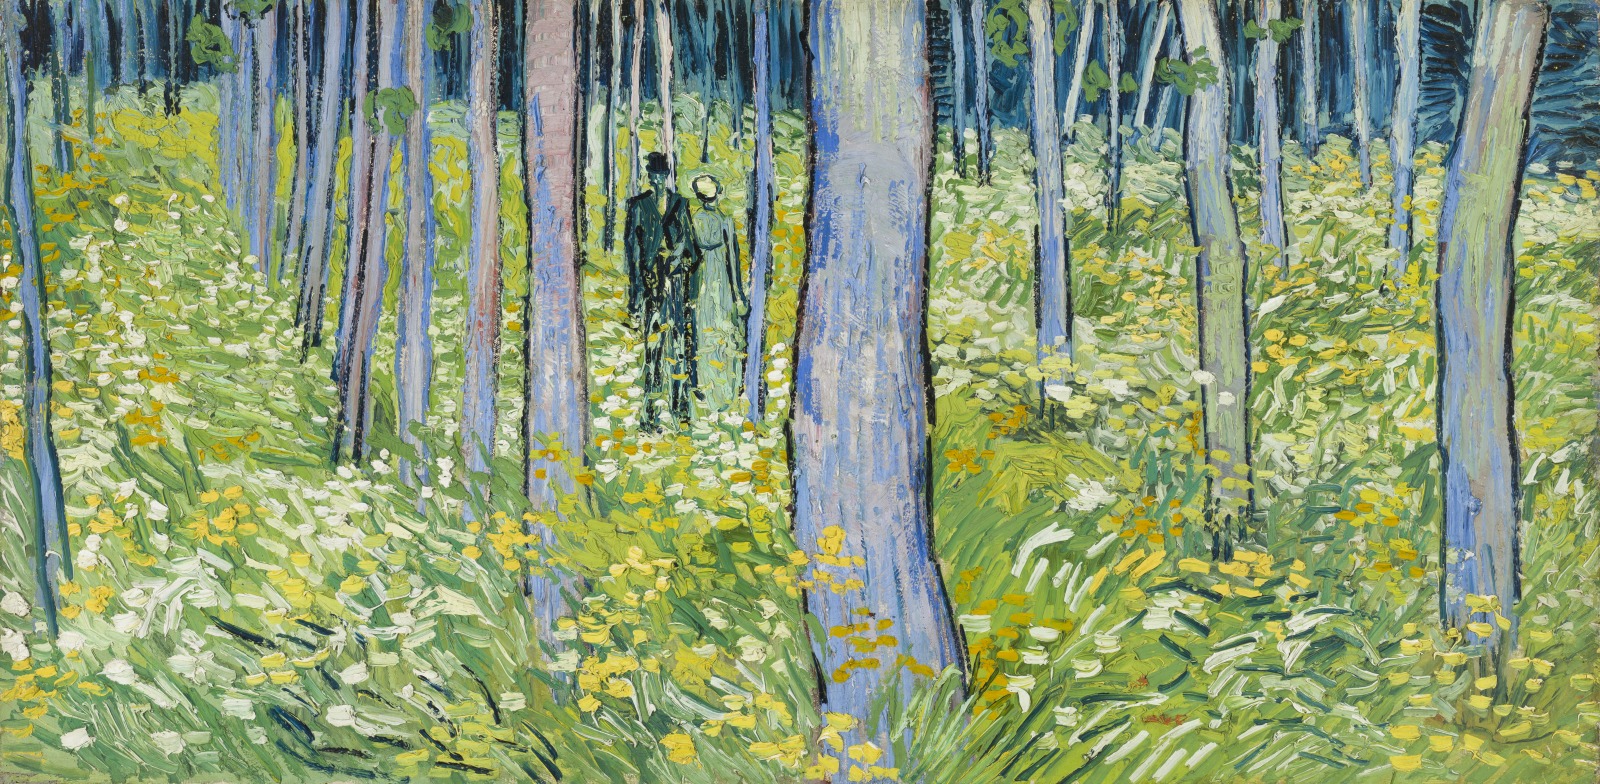 Undergrowth with Two Figures